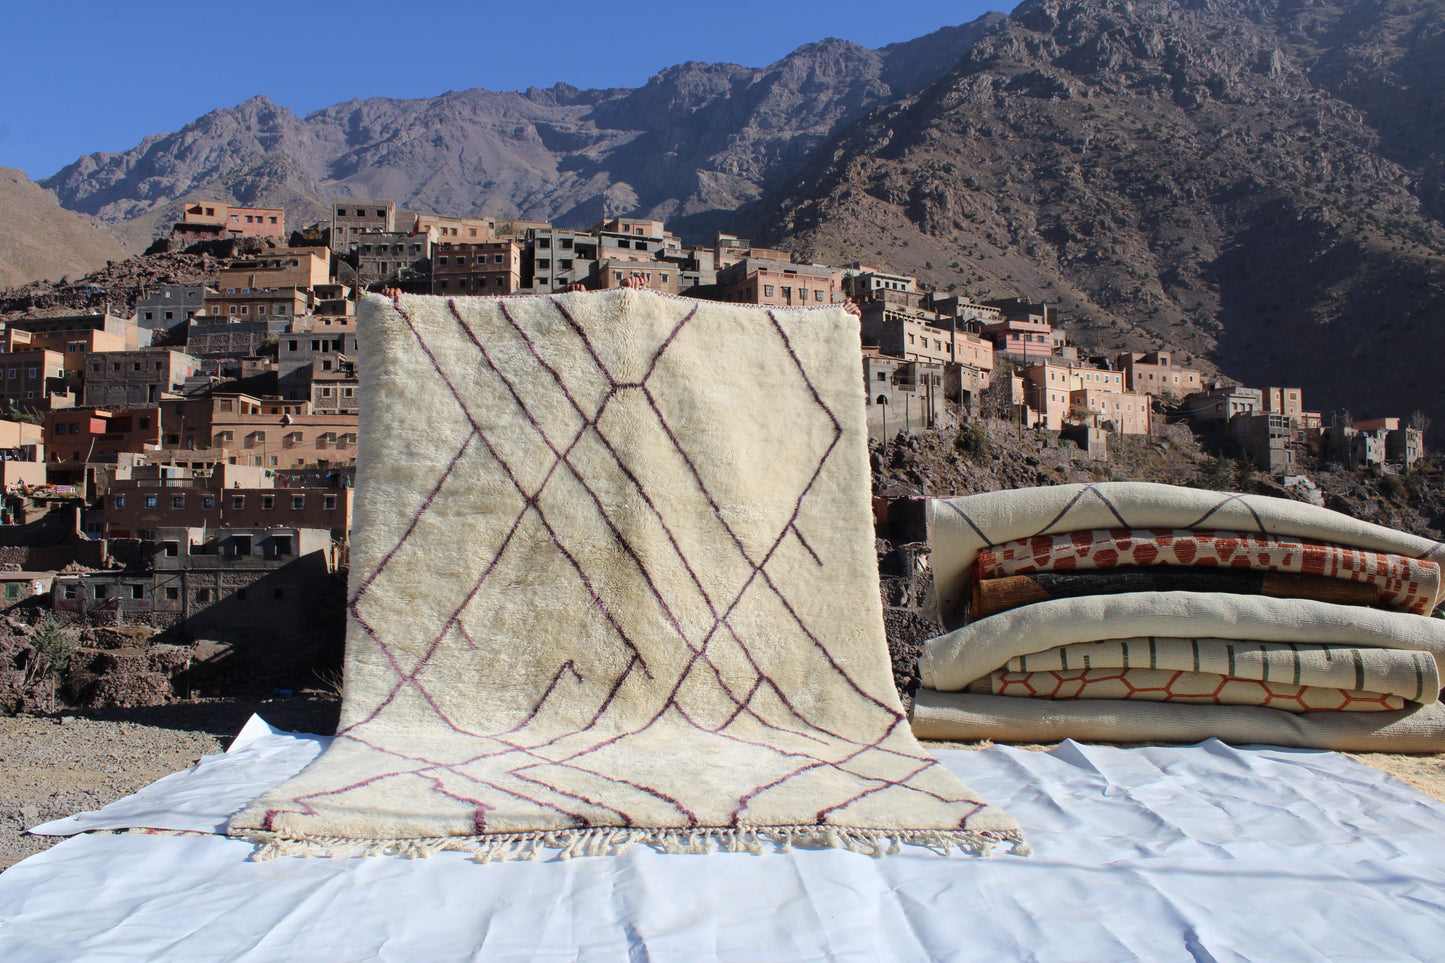 Beni Ourain rugs originate from the Atlas Mountains of Morocco and are characterized by their distinctive, neutral-toned, and geometric designs. These handwoven rugs often feature a plush pile and are made by the Berber tribes,  size is 310x210 cm